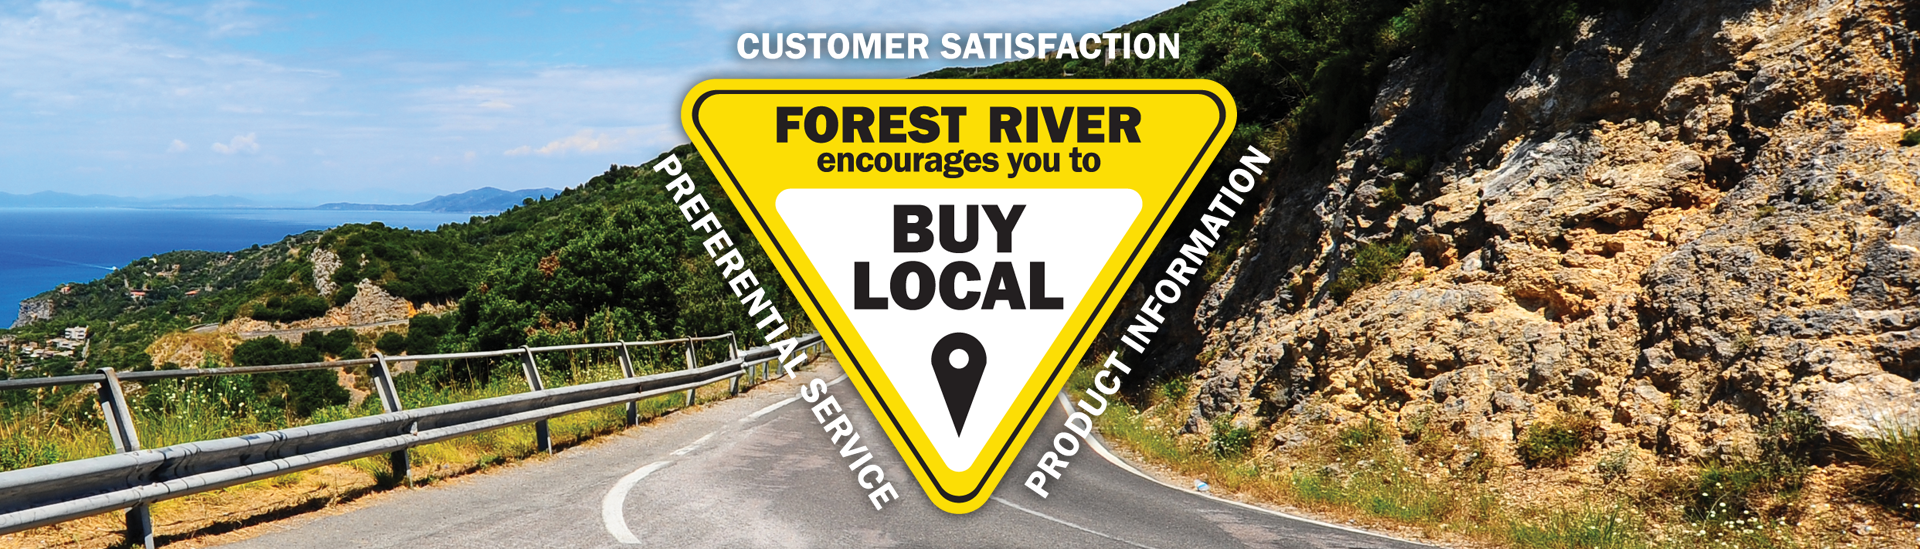 Forest River encourages you to buy local: customer satisfaction, preferential service, product information